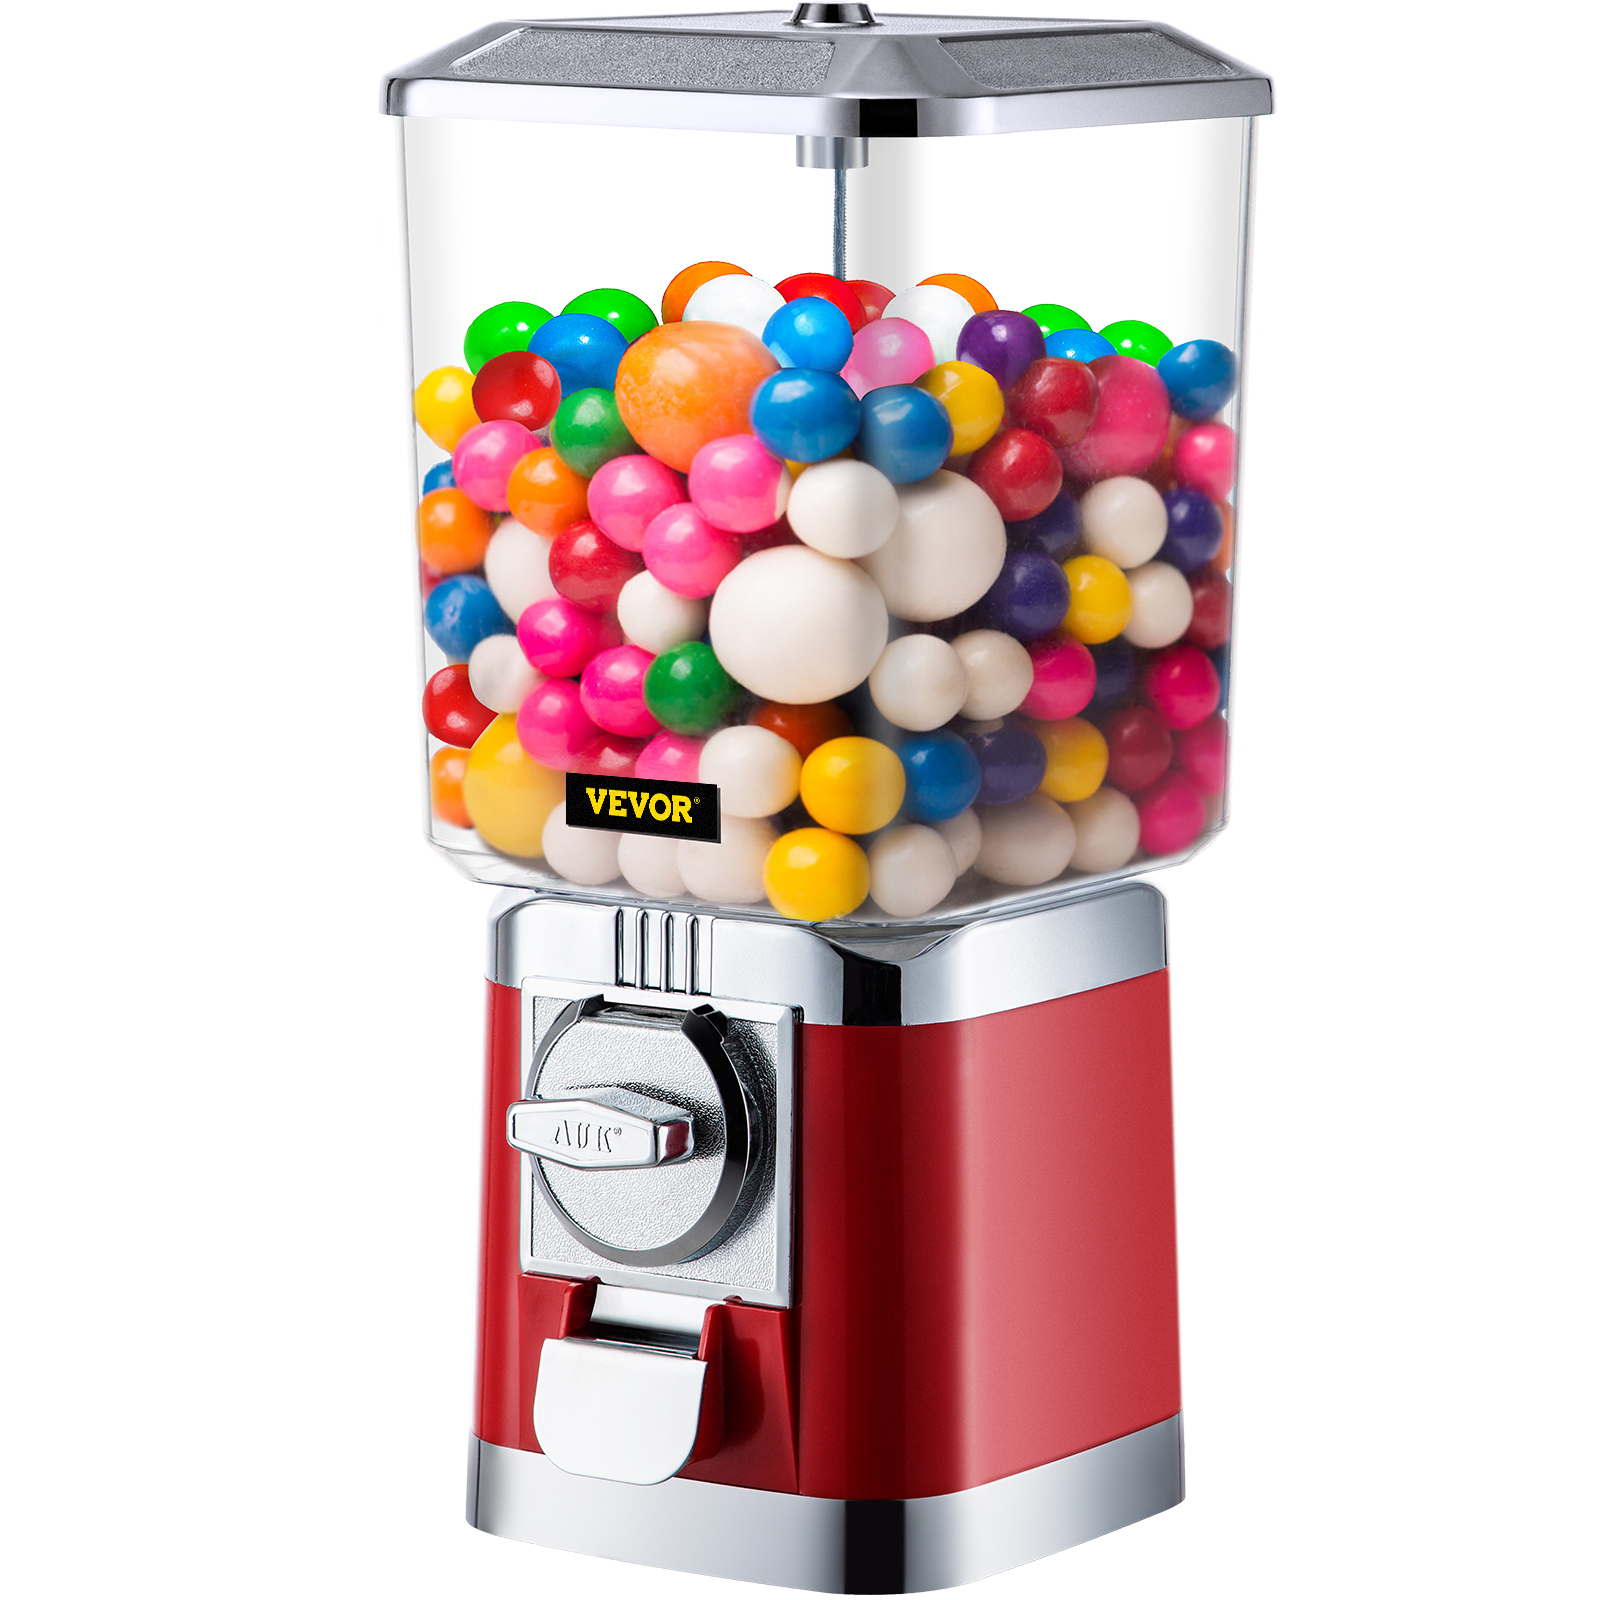 VEVOR Aluminum Alloy Gumball Machine | Commercial/Residential | Red | 375 Candies | Knobs | Includes Accessories | Key Lock | Specialty Small Kitchen